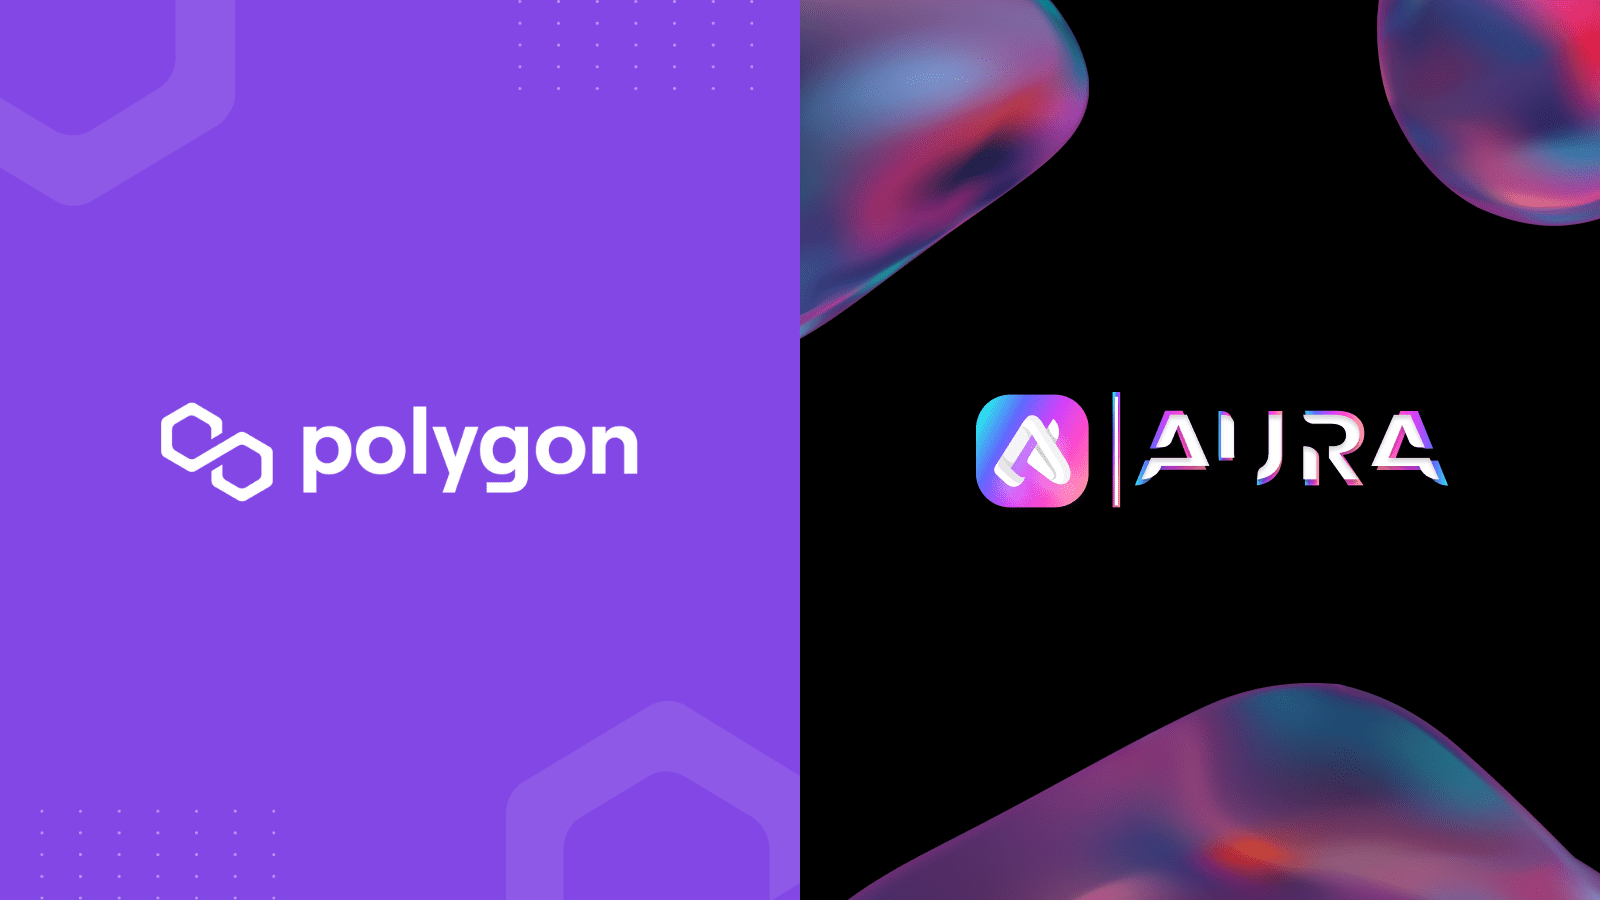 Auraswap Live On Polygon Kick Off The New Amm Dex Generation To Be A One Stop Trading Platform